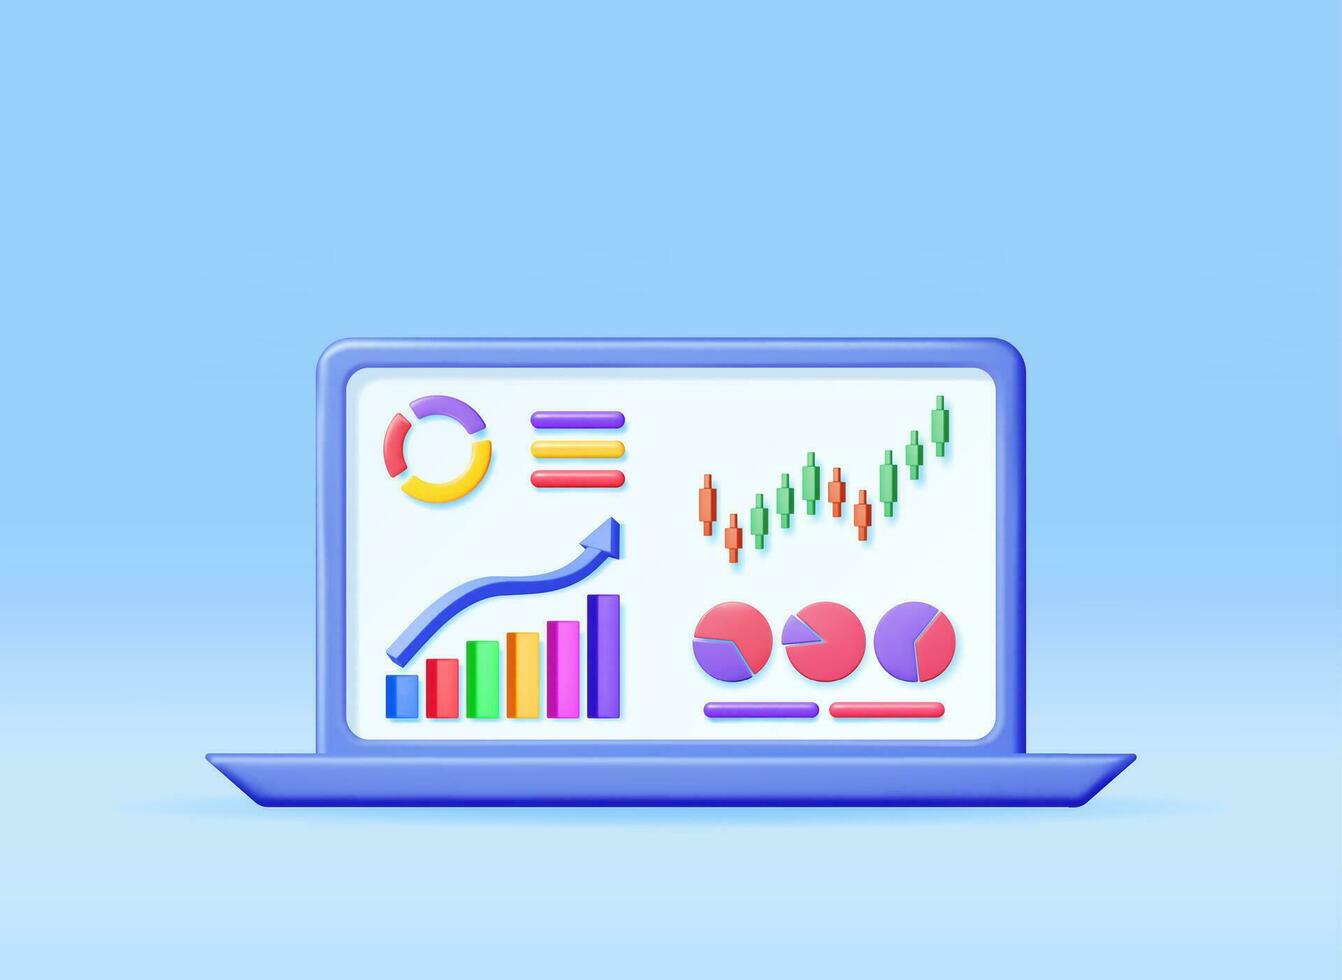 3D Growth Stock Chart and Arrow in Computer. Render Stock Arrow with Money on Laptop Shows Growth or Success. Financial Item, Report, Business Investment. Money and Banking. Vector Illustration